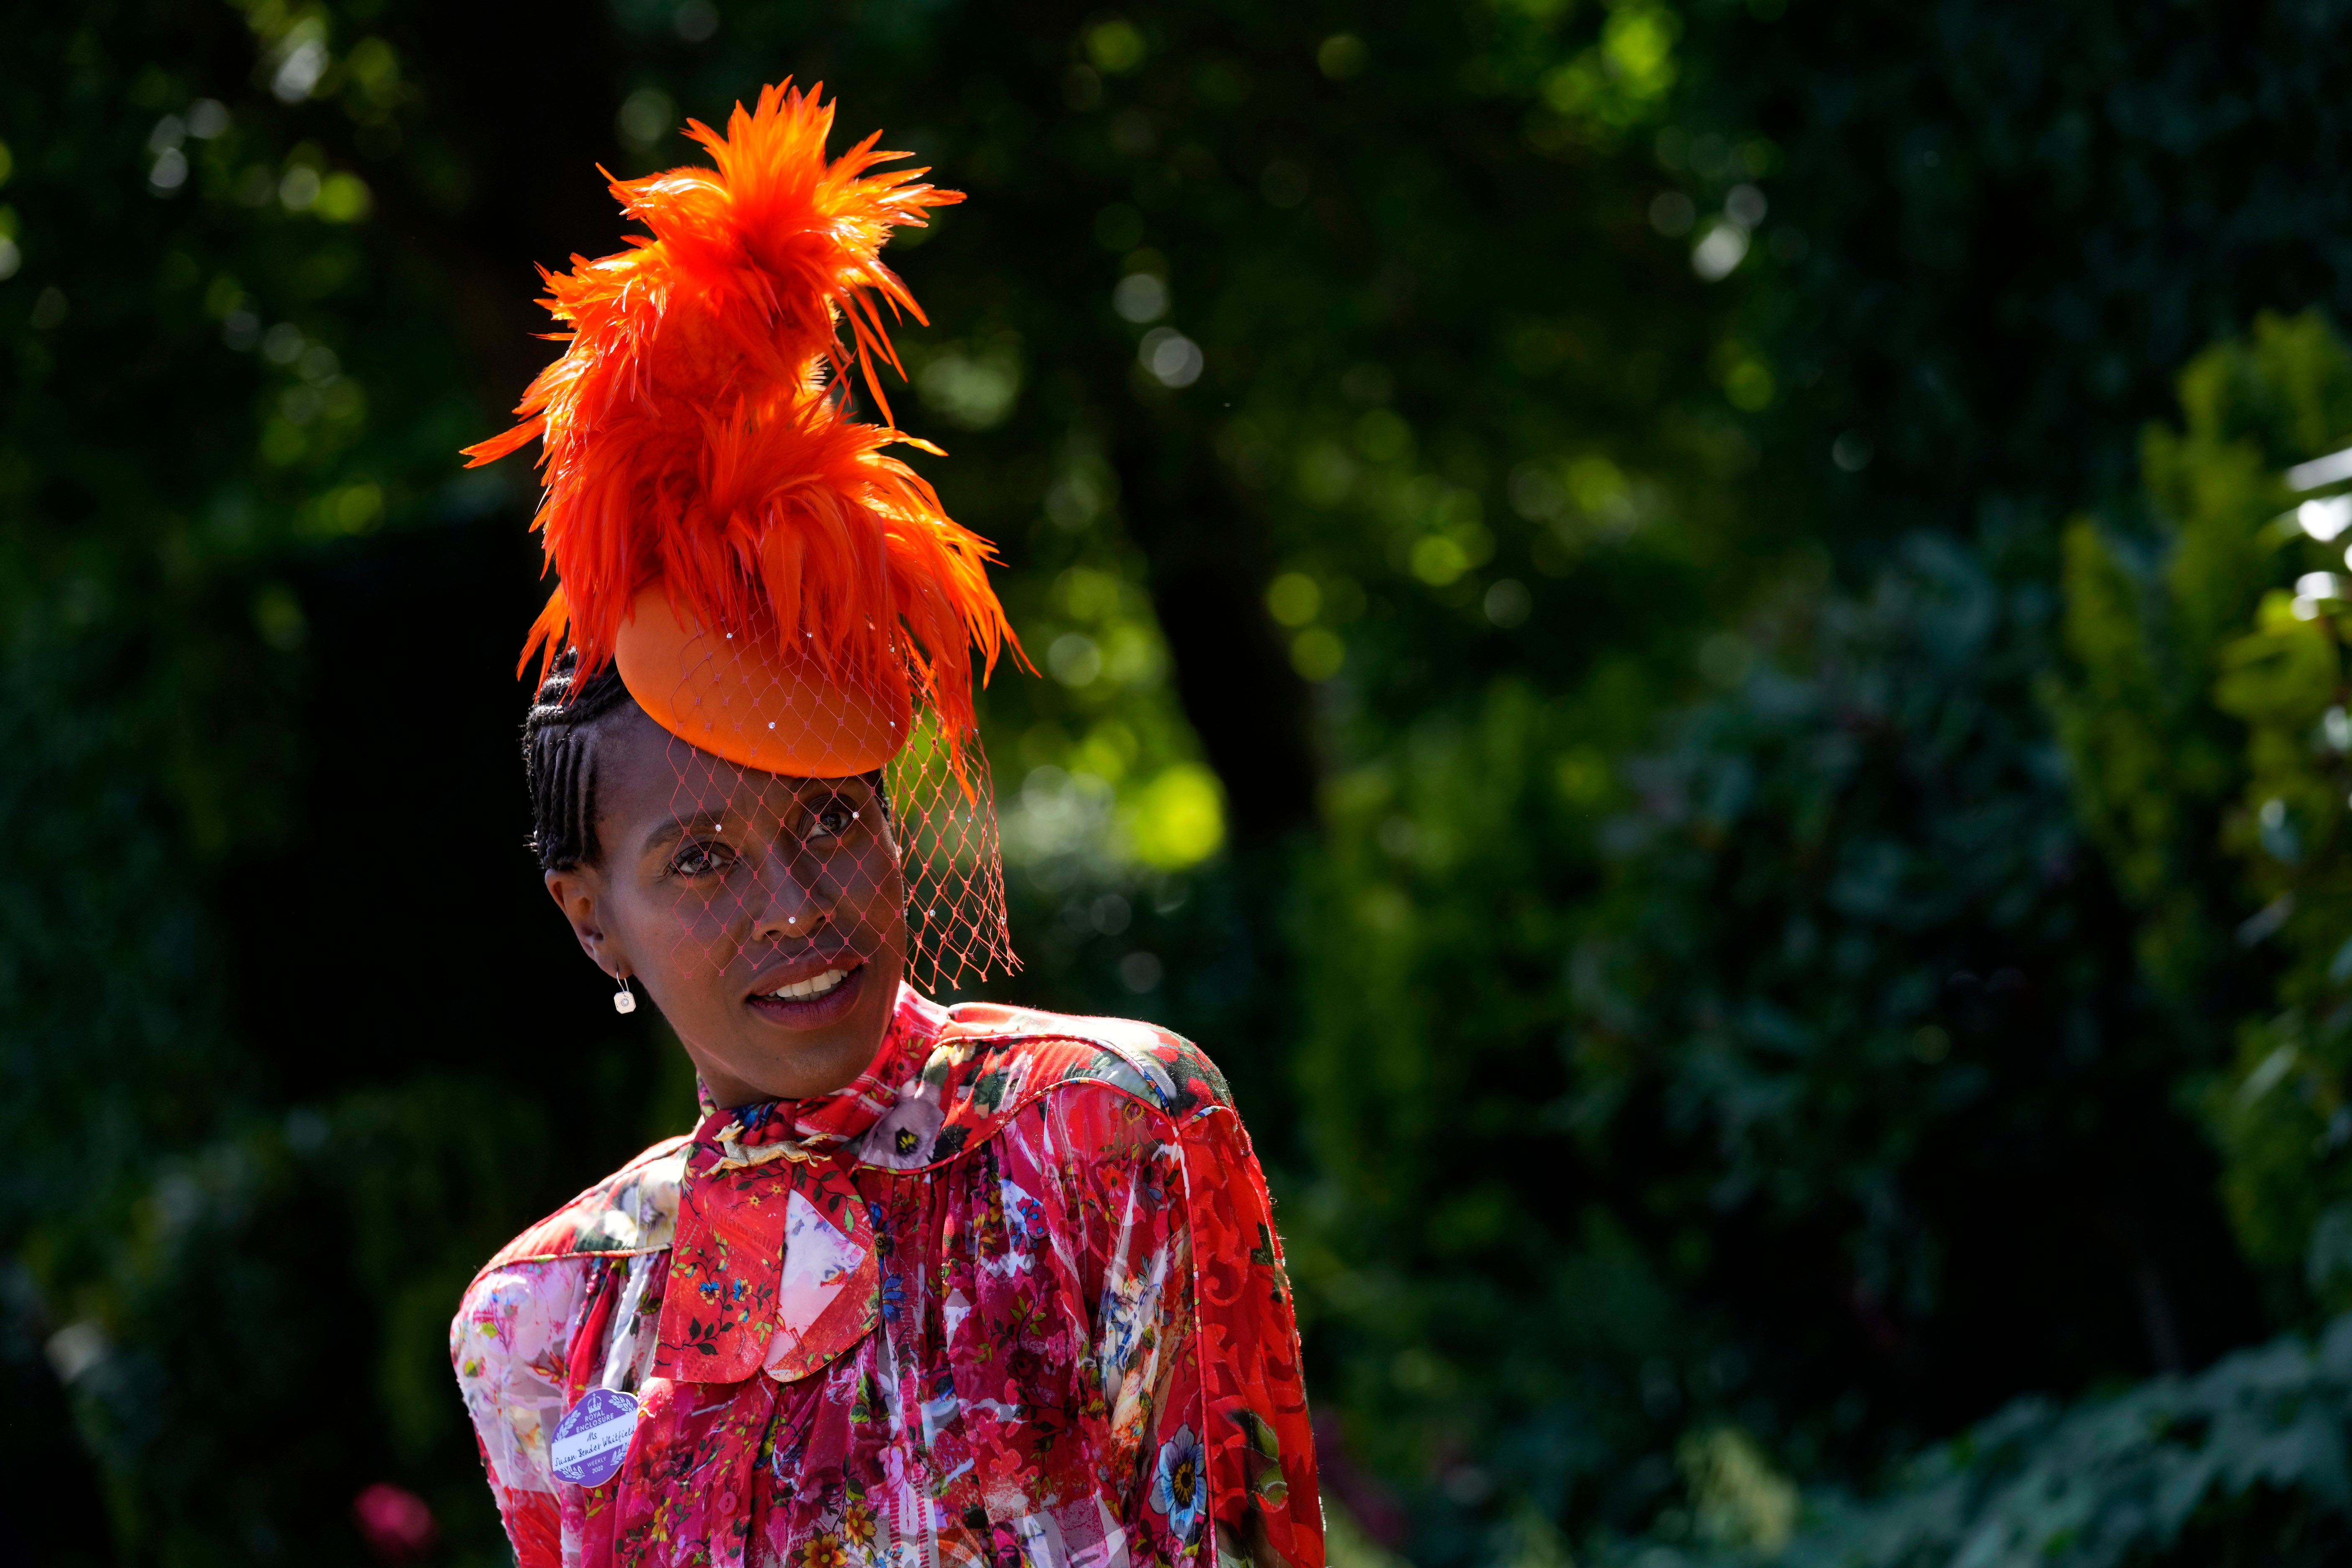 Susan Bender Whitfield arrives, on the second day of of the Royal Ascot horserace meeting